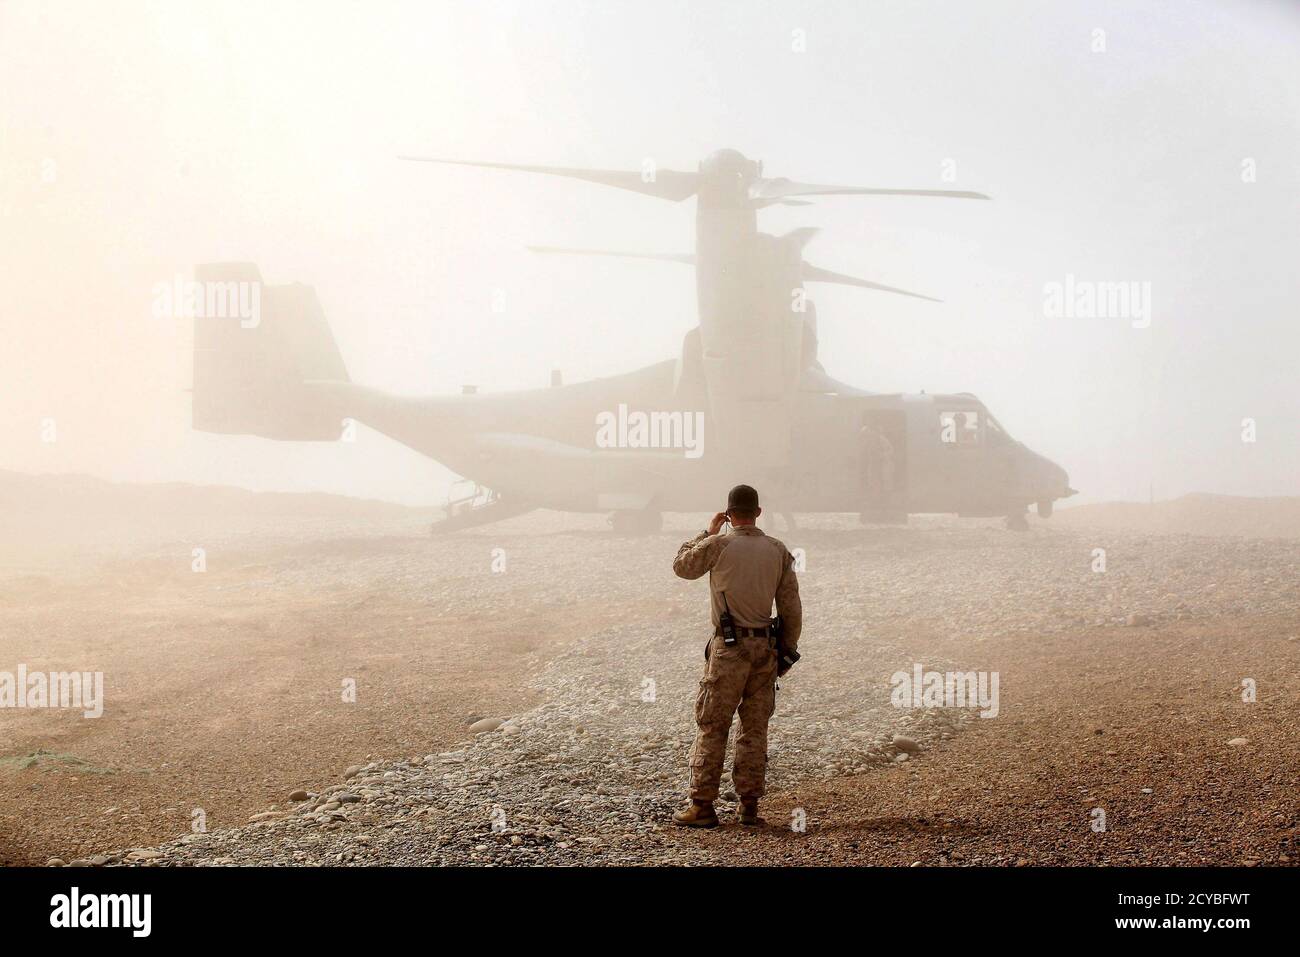 A U.S. Marine watches as an Osprey carrying U.S. Defense Secretary Leon Panetta arrives at Forward Operating Base Shukvani, Afghanistan March 14, 2012. Panetta told troops in Afghanistan on Wednesday that the massacre of 16 Afghan civilians by an American soldier should not deter them from their mission to secure the country ahead of a 2014 NATO withdrawal deadline.  REUTERS/Scott Olson/Pool (AFGHANISTAN - Tags: POLITICS MILITARY TPX IMAGES OF THE DAY) Stock Photo